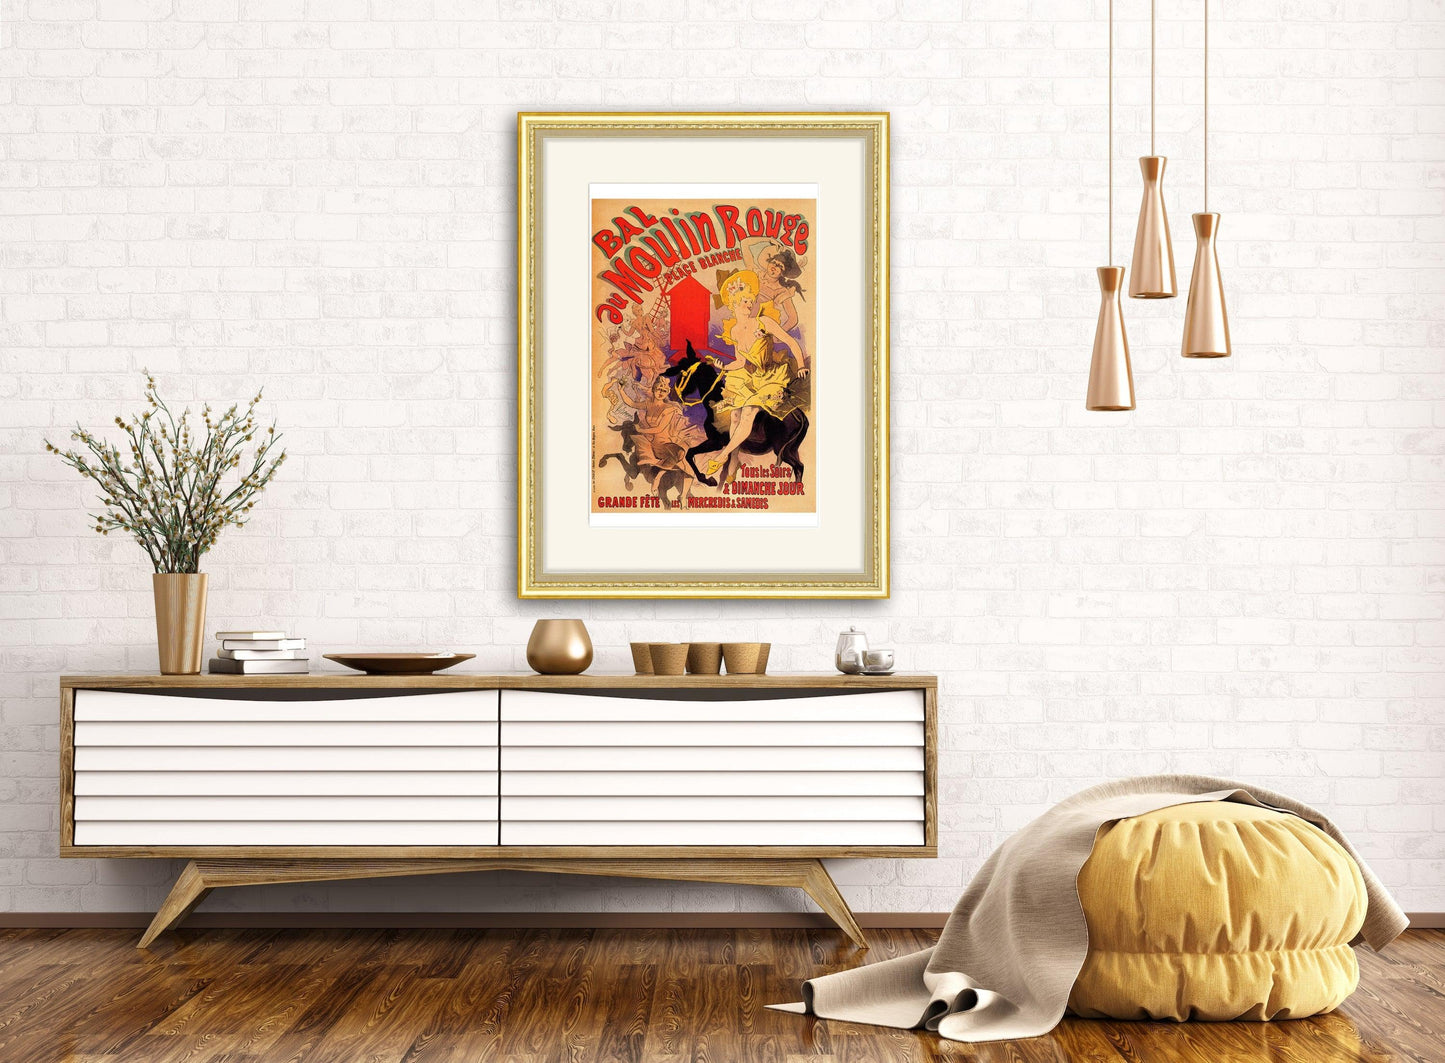 Give your home decor a touch of elegance through our exquisite Bal au Moulin Rouge reproduction poster. The artwork is a collage with the theatrical poster's design by Jules Chéret (French graphic designer, 1836-1932). Year of created 1889.